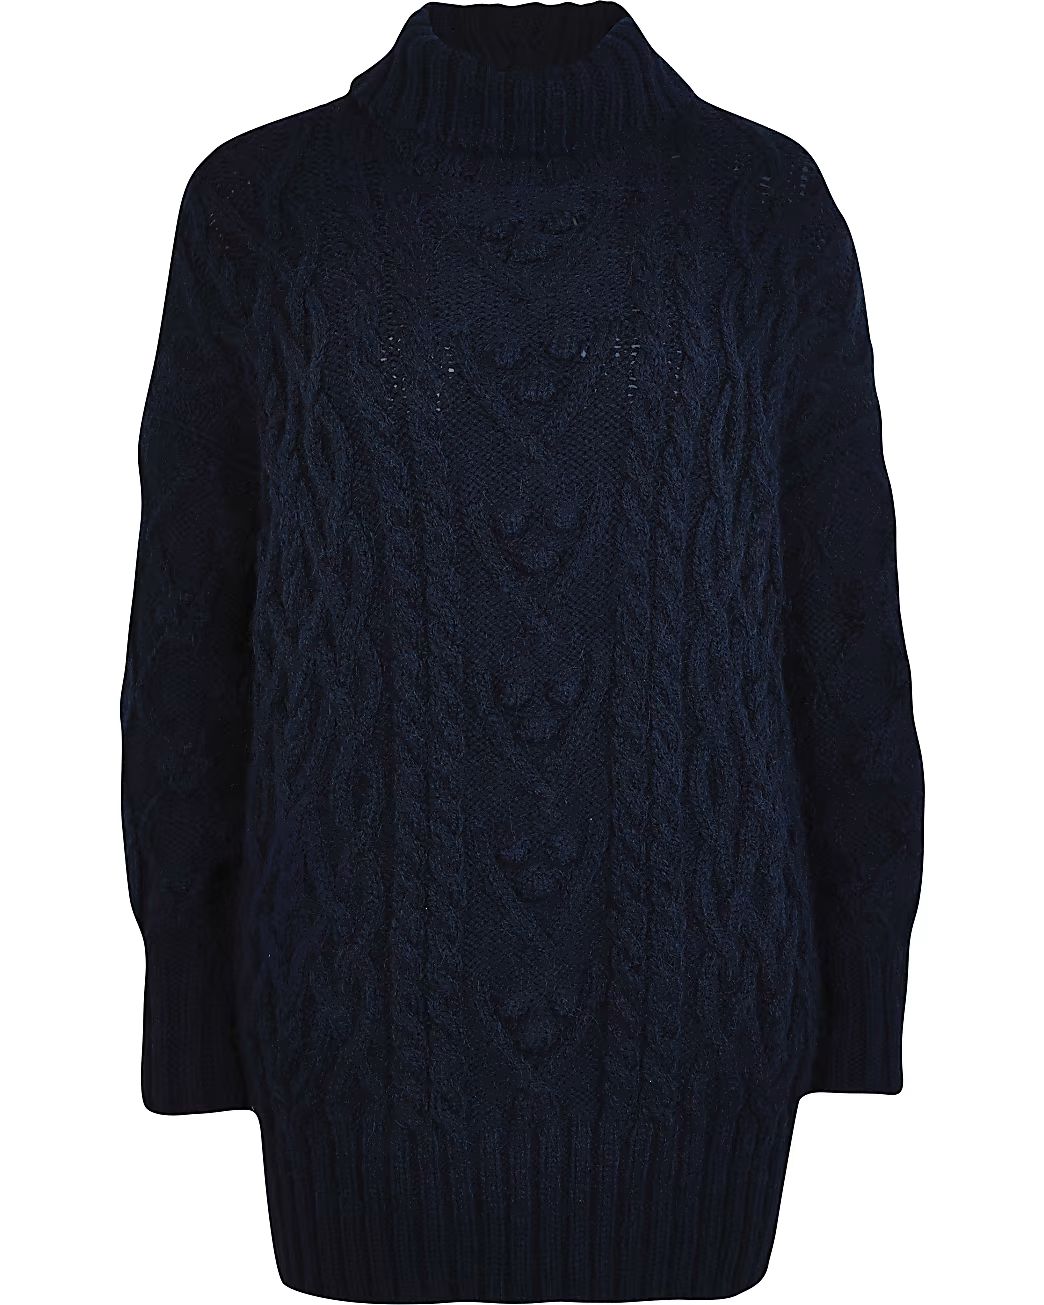 Navy chunky cable knit jumper | River Island (UK & IE)